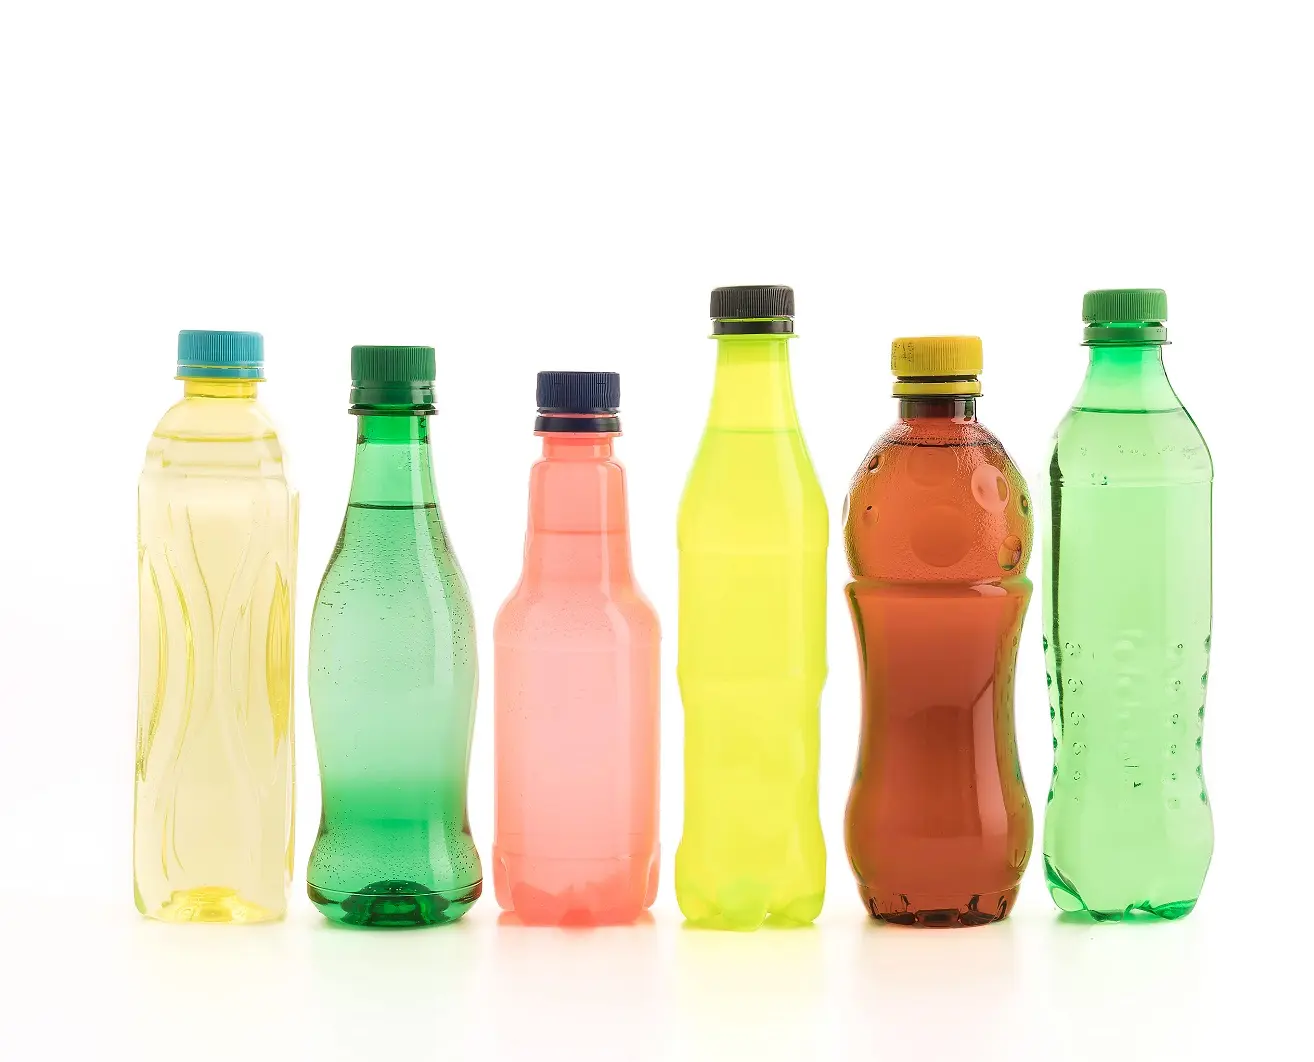 Spain | New tax on single-use plastic packaging